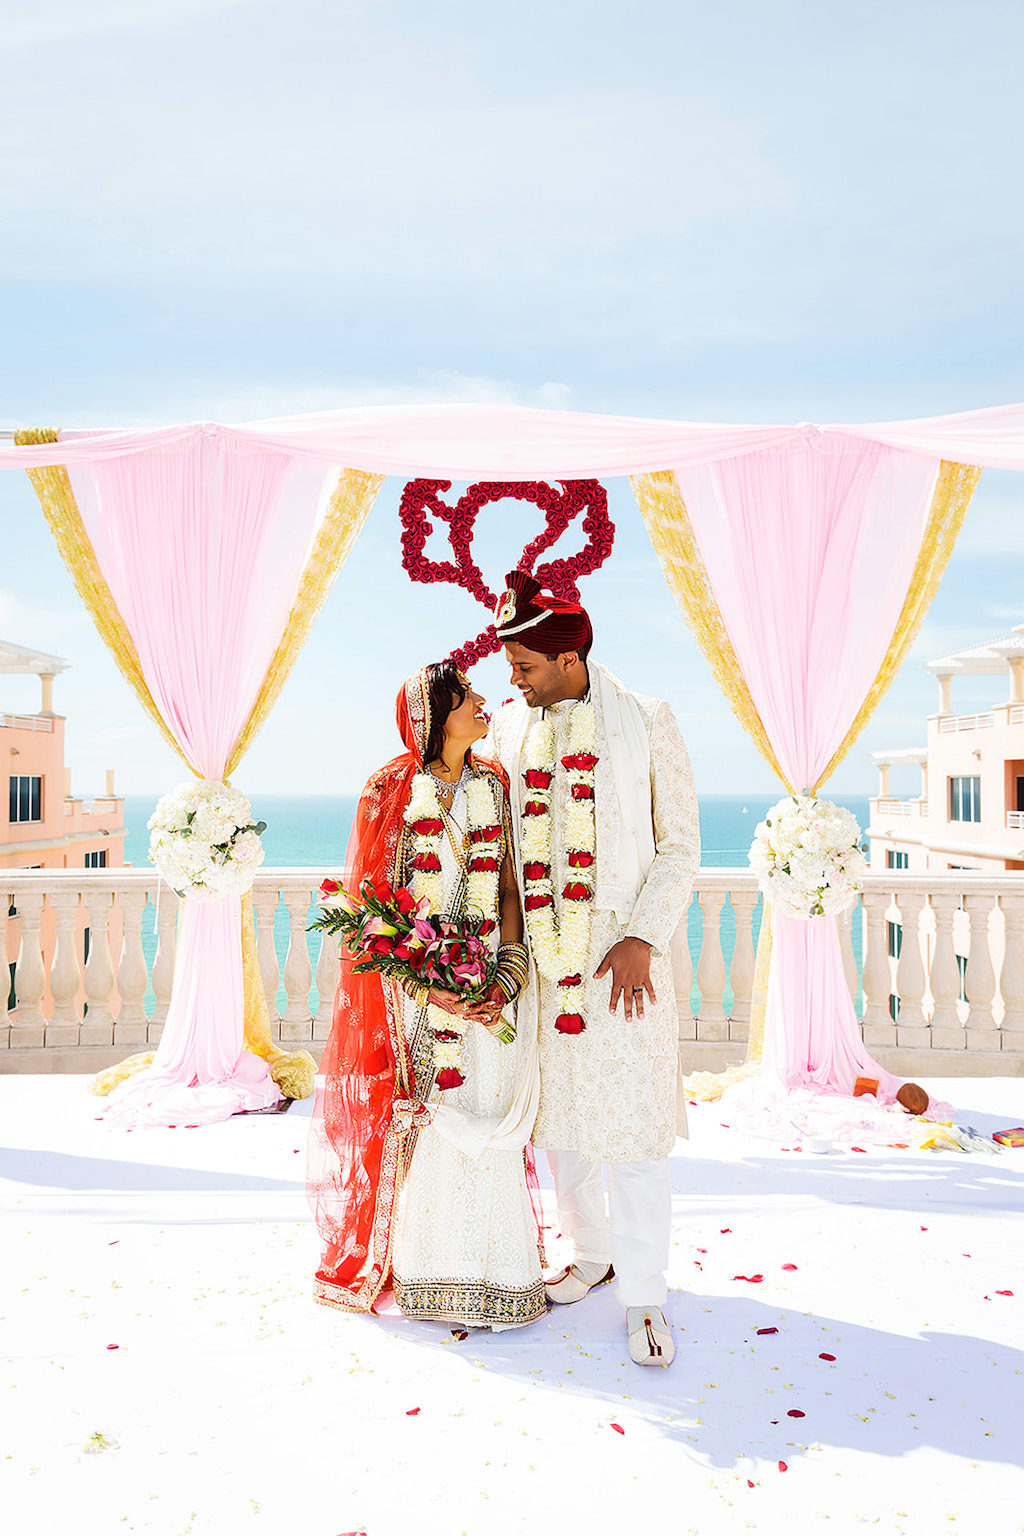 Florida Indian Bride and Groom Wedding Ceremony Portrait, Blush Pink and Gold Linen Drapery Arch, White and Blush Pink Floral Bouquets, Bride Wearing White Saree and Red Headdress, Groom Wearing White Dress Suit and Red and White Floral Leis | Clearwater Beach Waterfront Wedding Venue Hyatt Regency Clearwater Beach